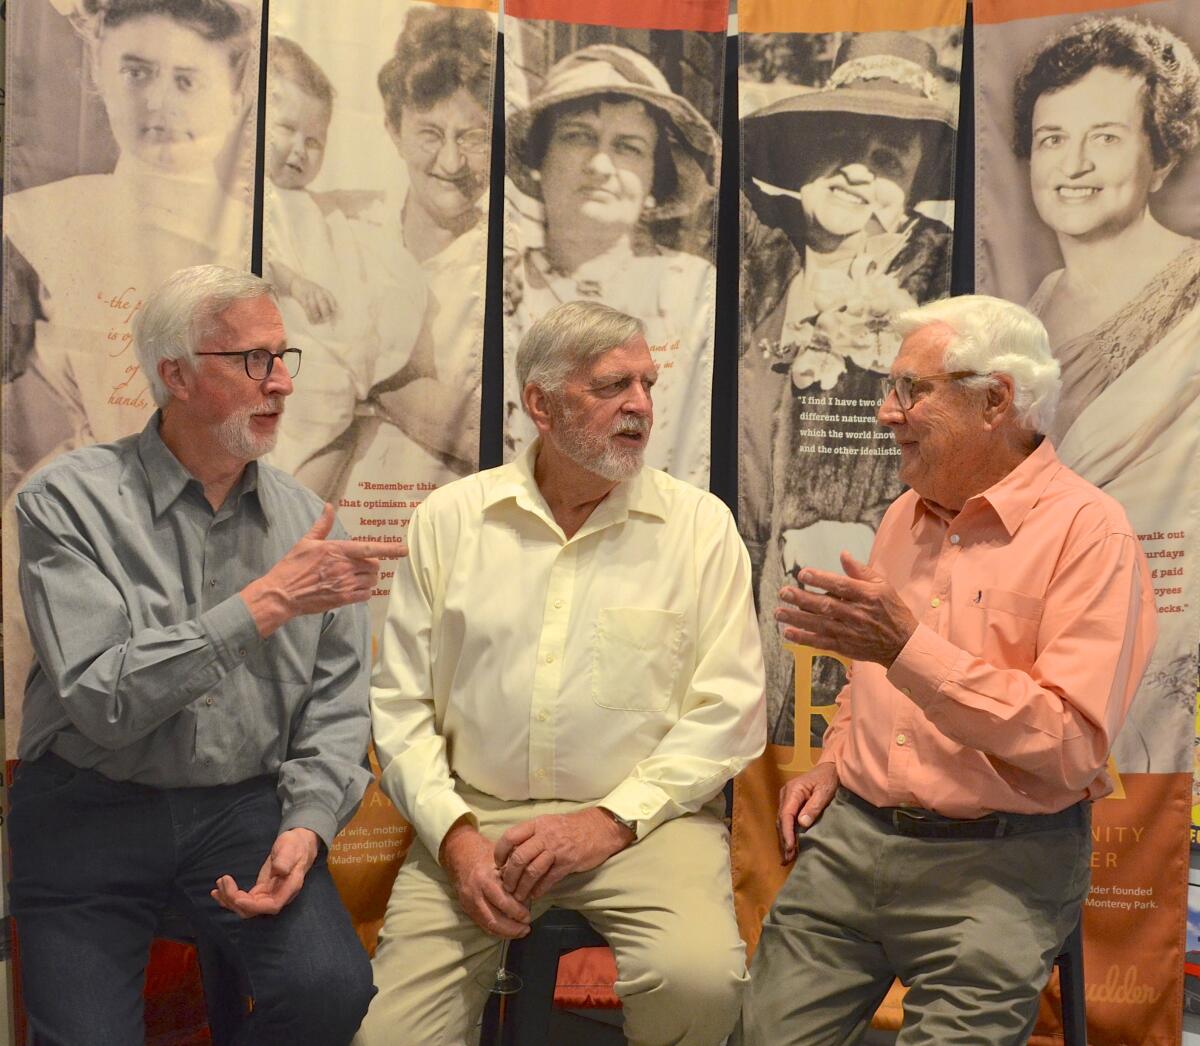 Kent, Craig and John Scudder compare memories with a vintage photo collection at Balboa Island Museum.